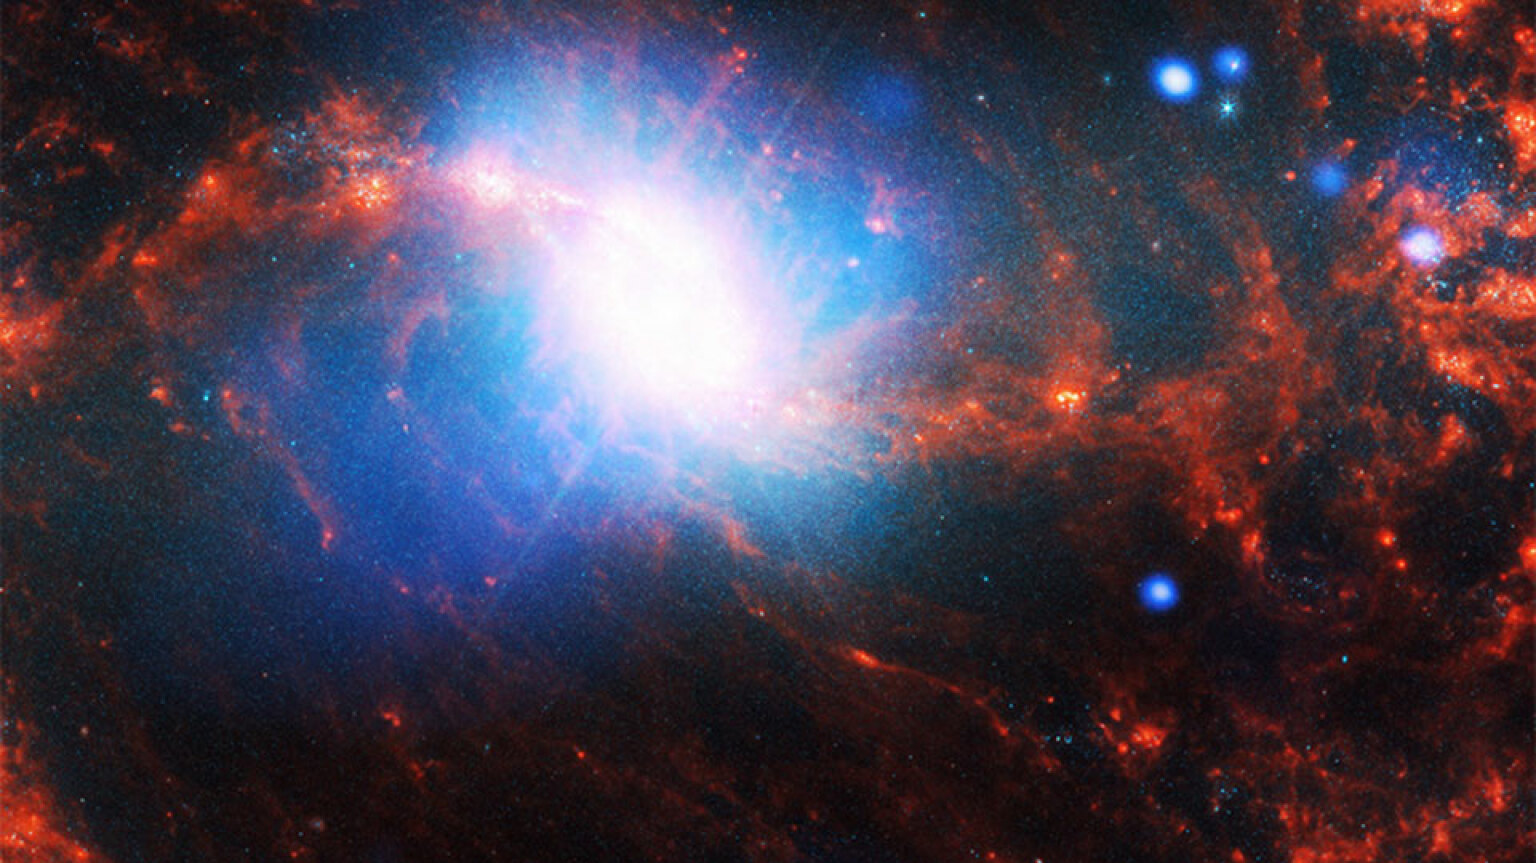 A space photo shows a spiral galaxy with a blue and white centre and orange spirals.